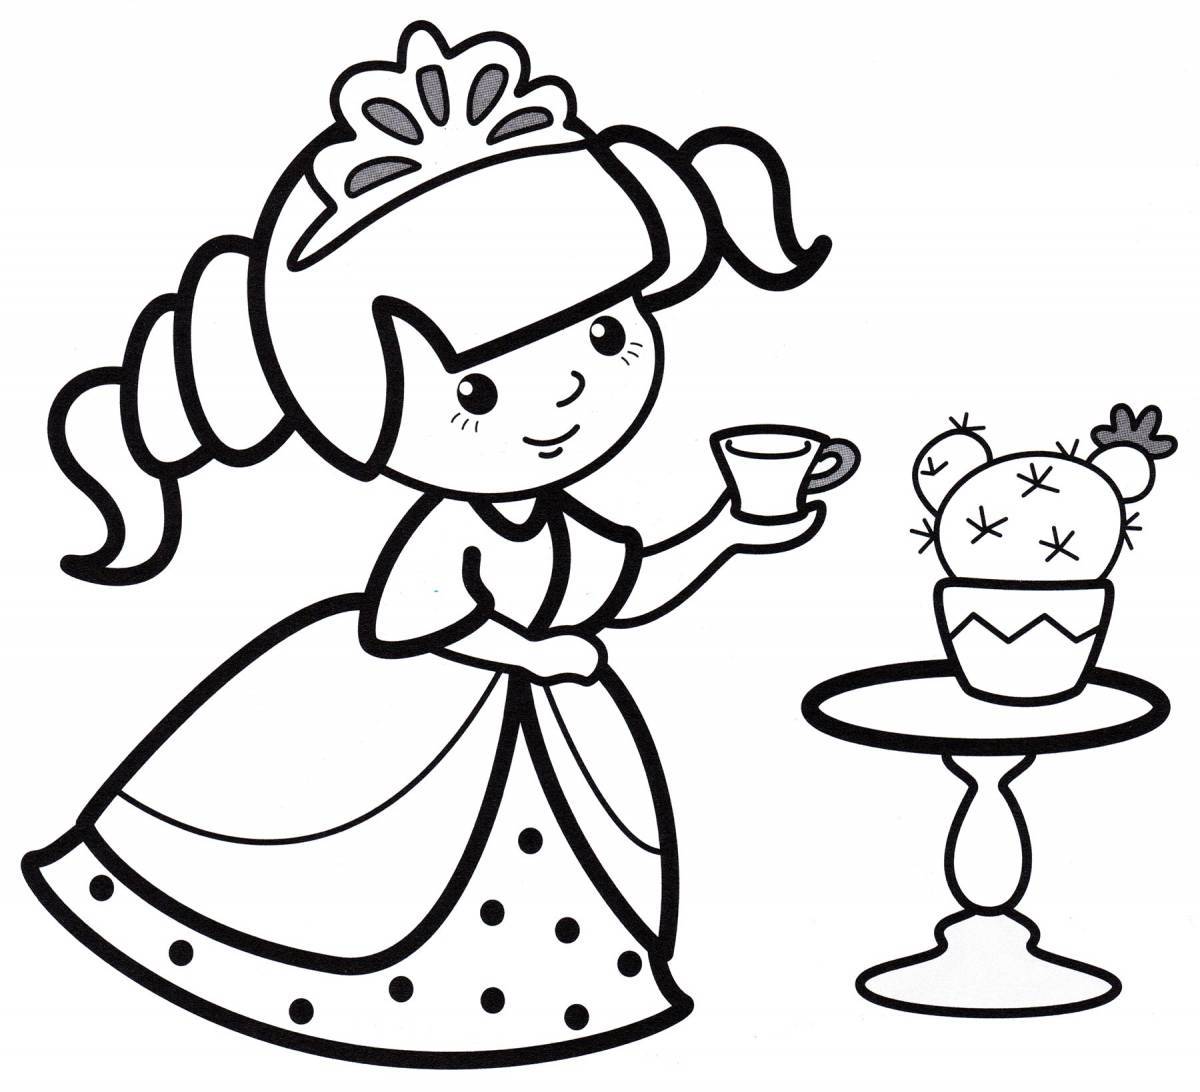 Funny drink coloring pages